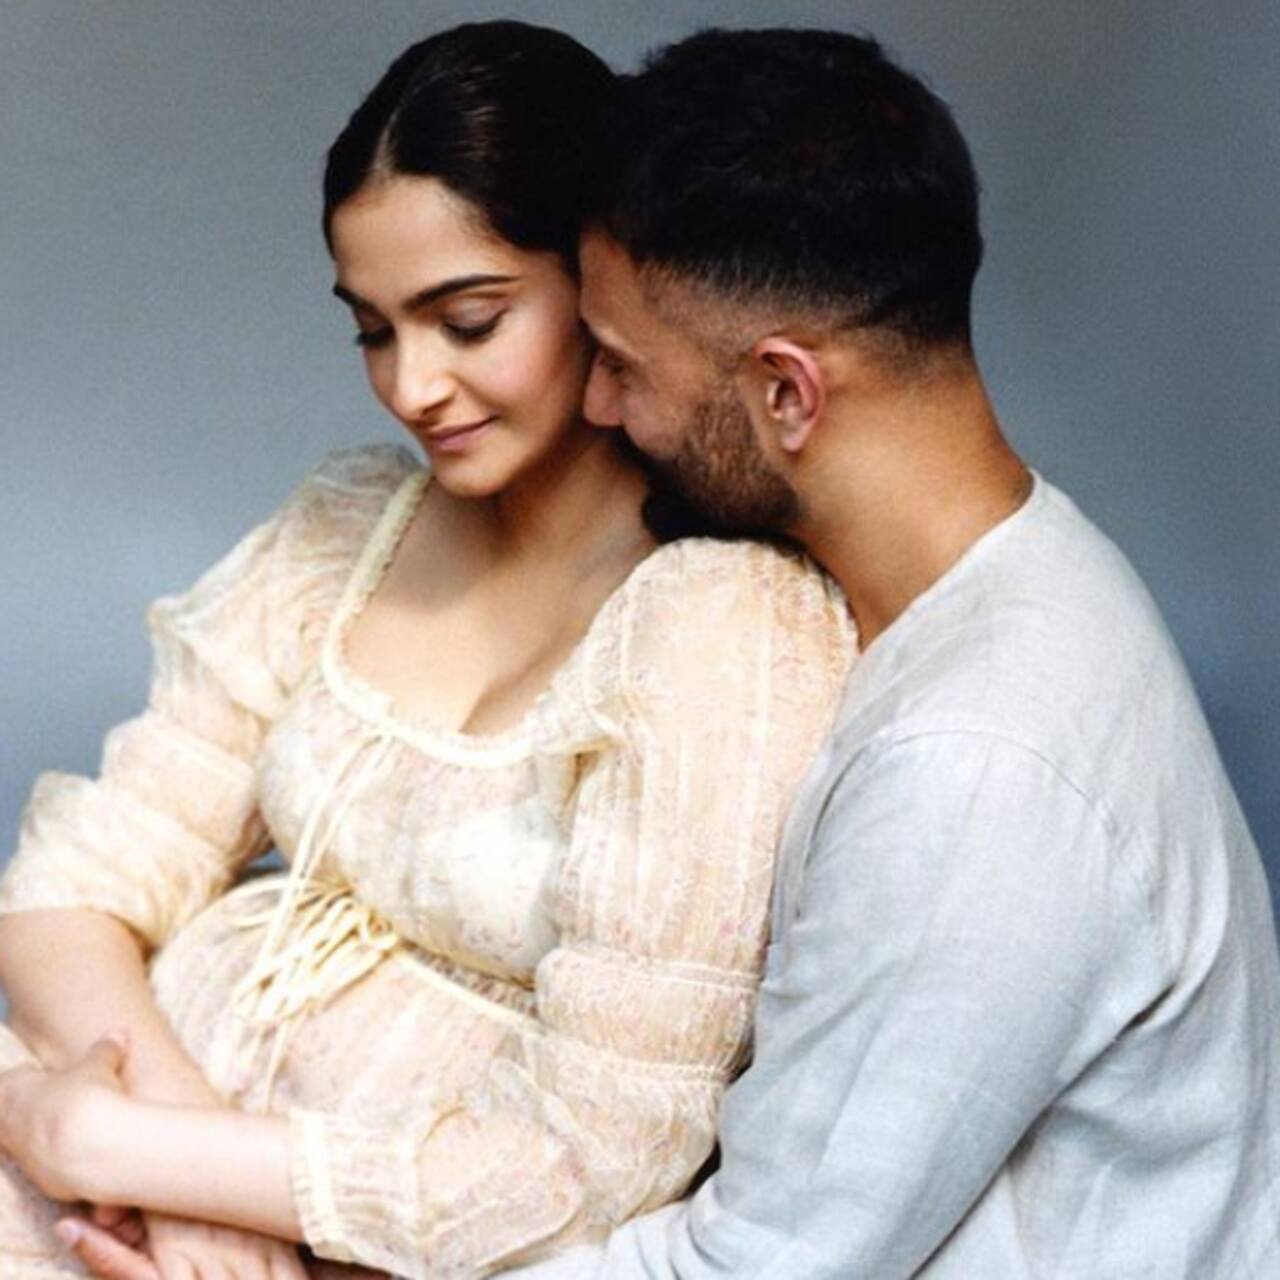 Sonam Kapoor Glows In New Pregnancy Photoshoot With Anand Ahuja Reveals Obssessed With You